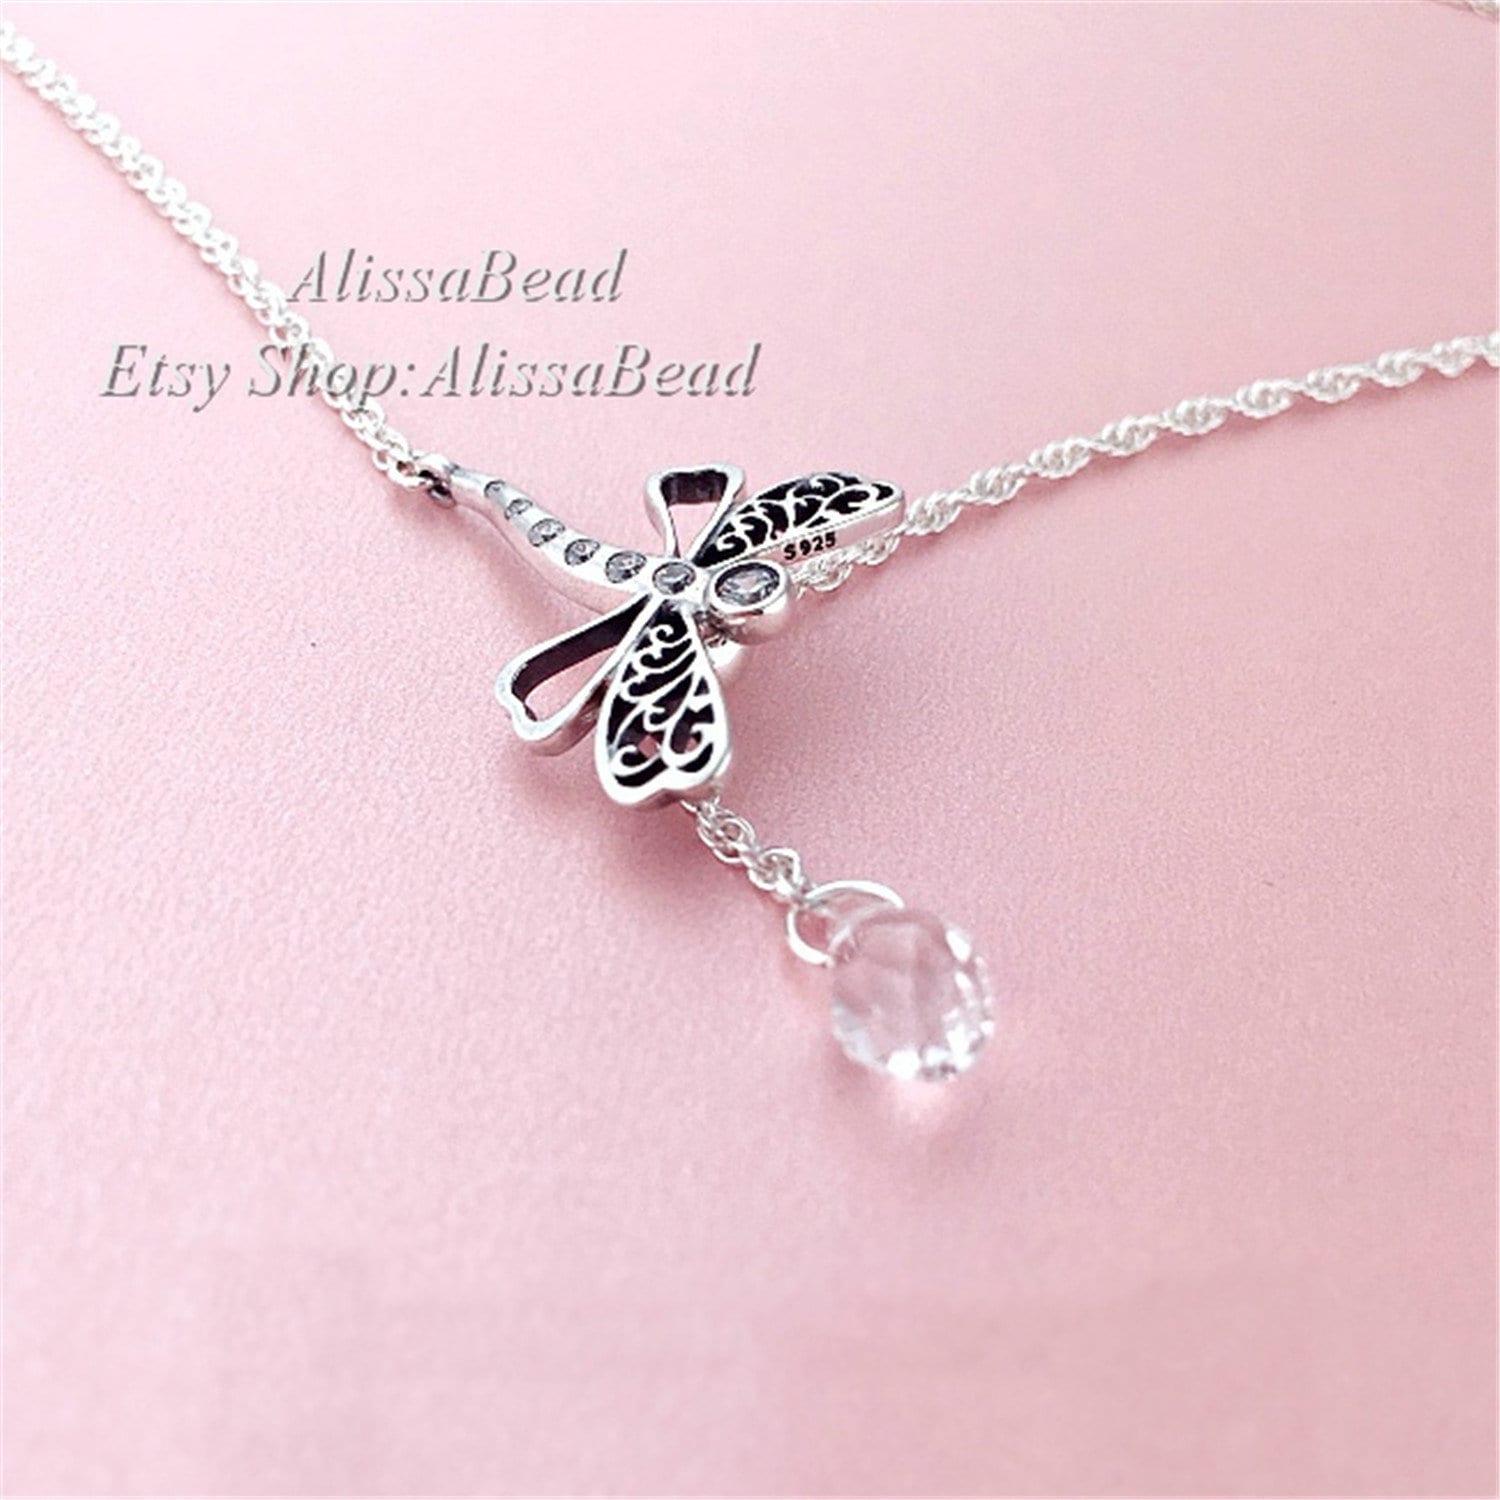 Spring Release S925 Sterling Silver Dreamy Dragonfly